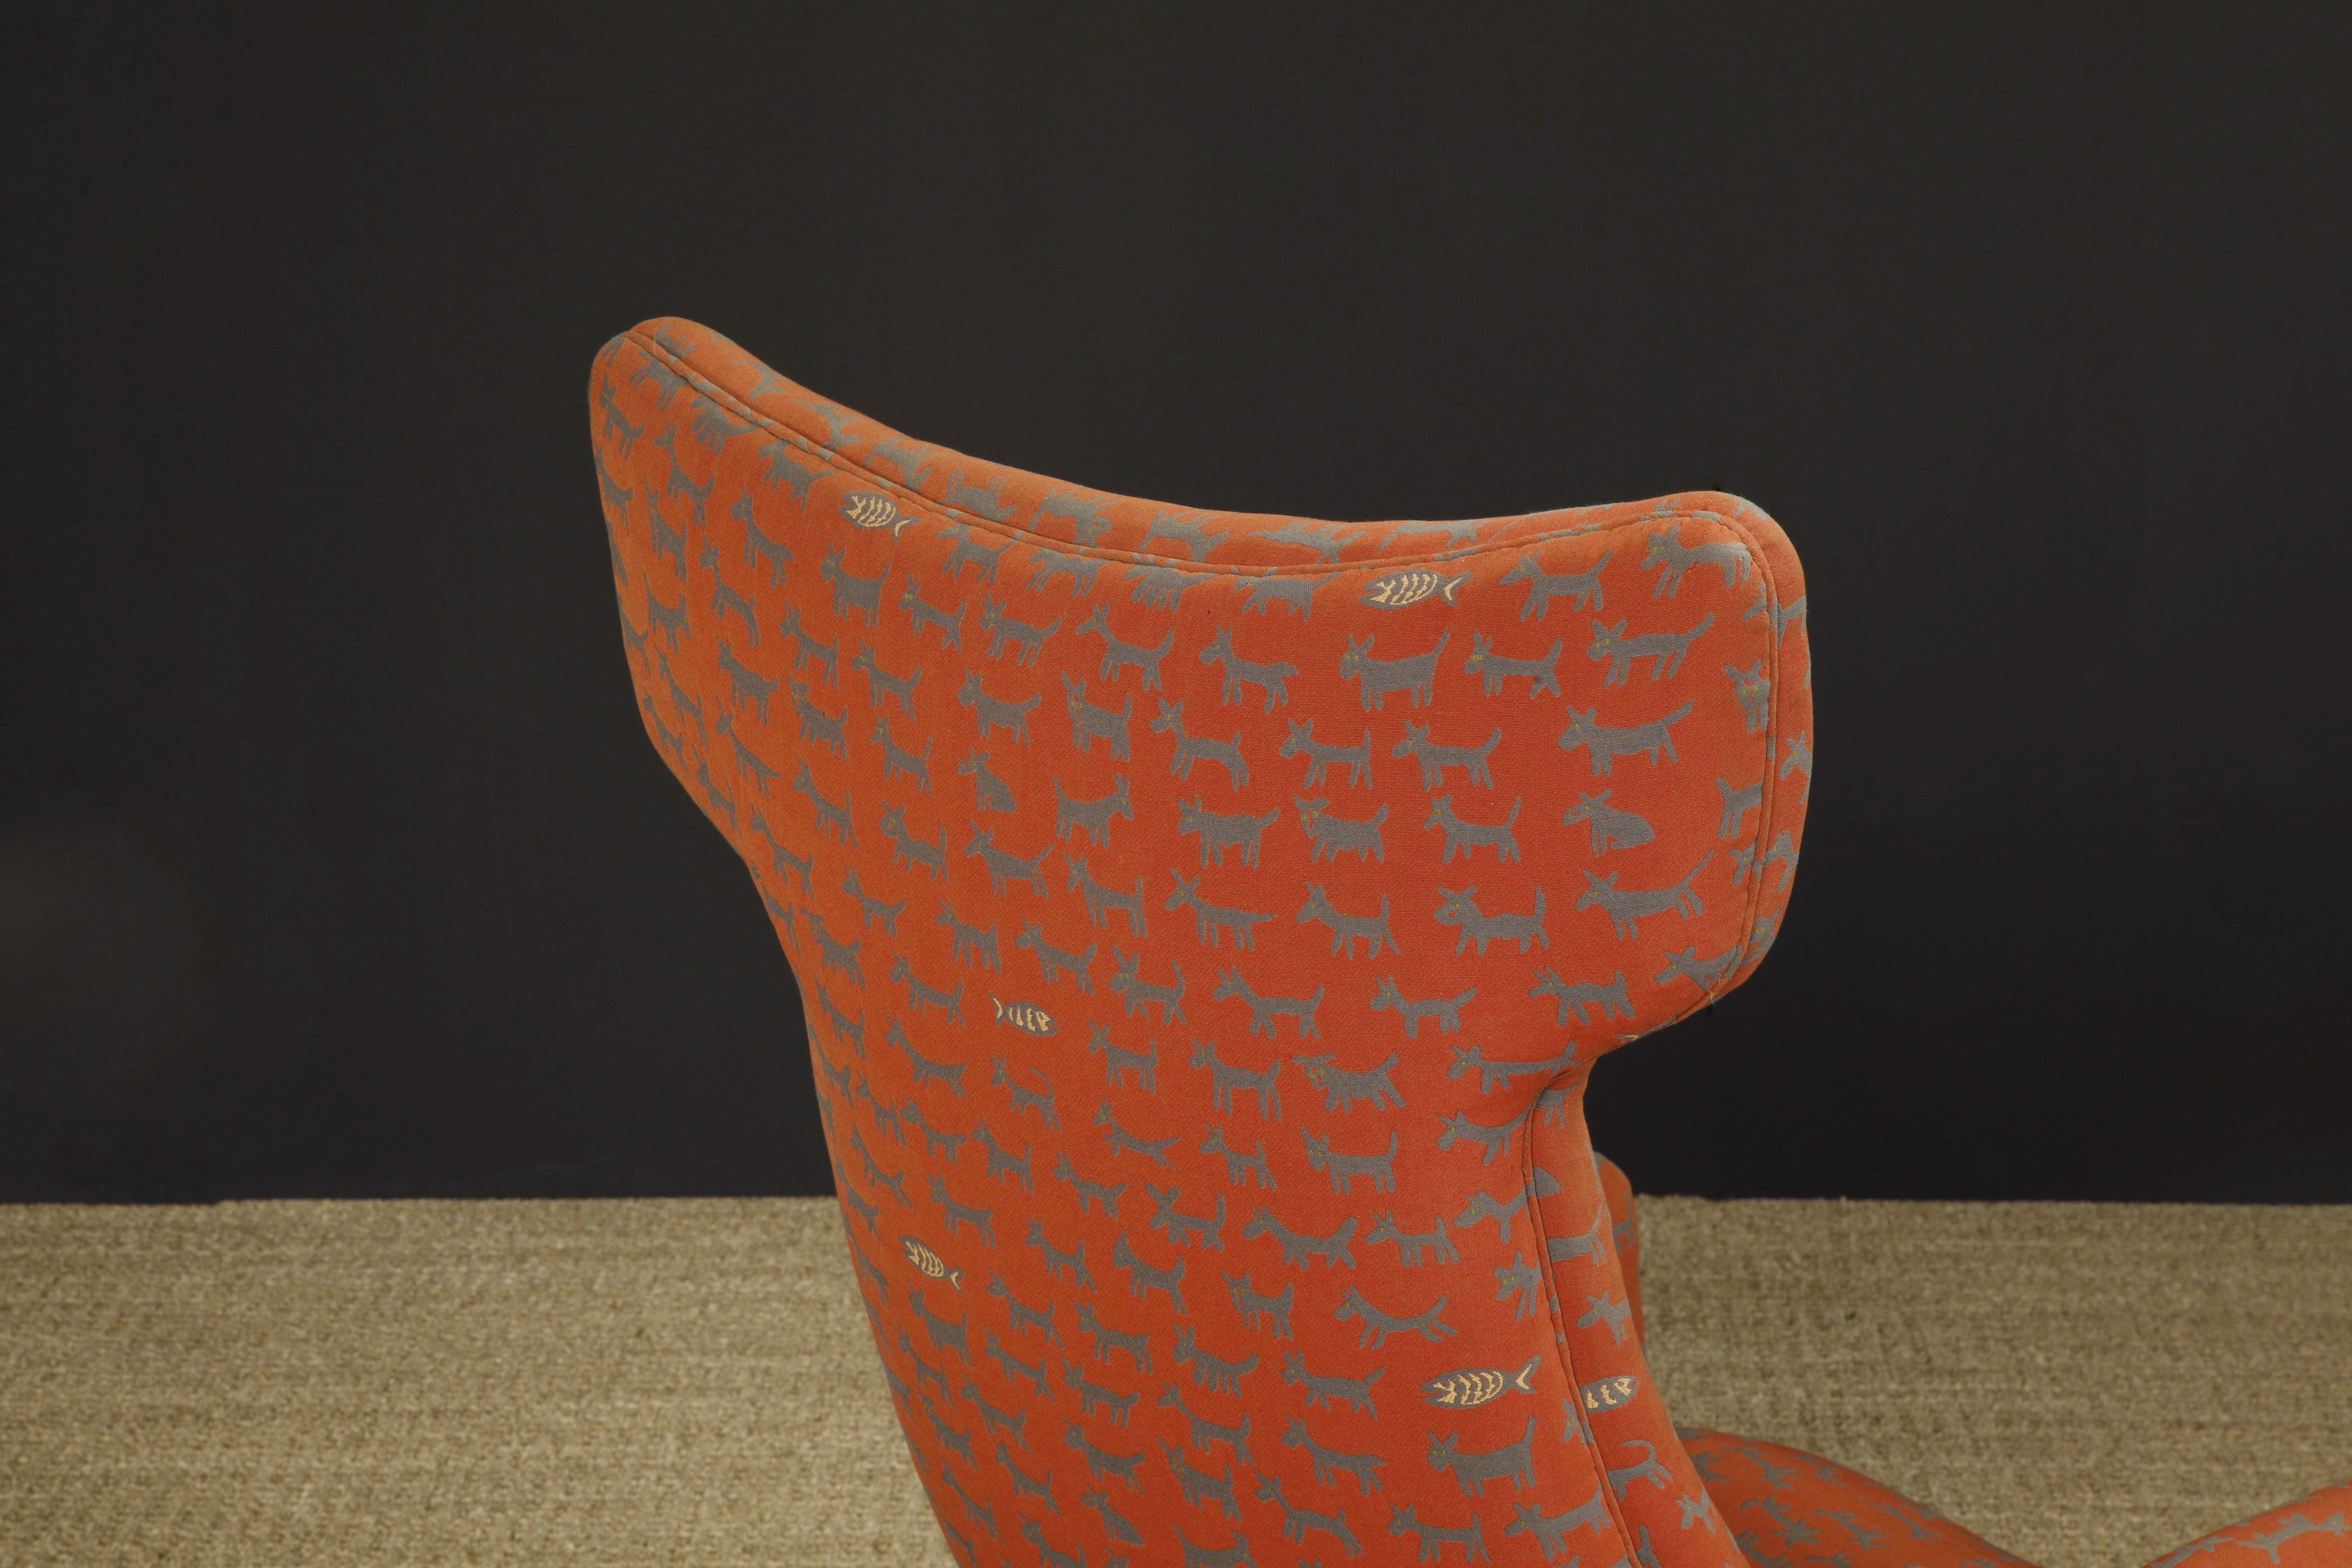 Rare 'Ondine' Wingback Lounge Chair by Vladimir Kagan, c 1970, Signed For Sale 7